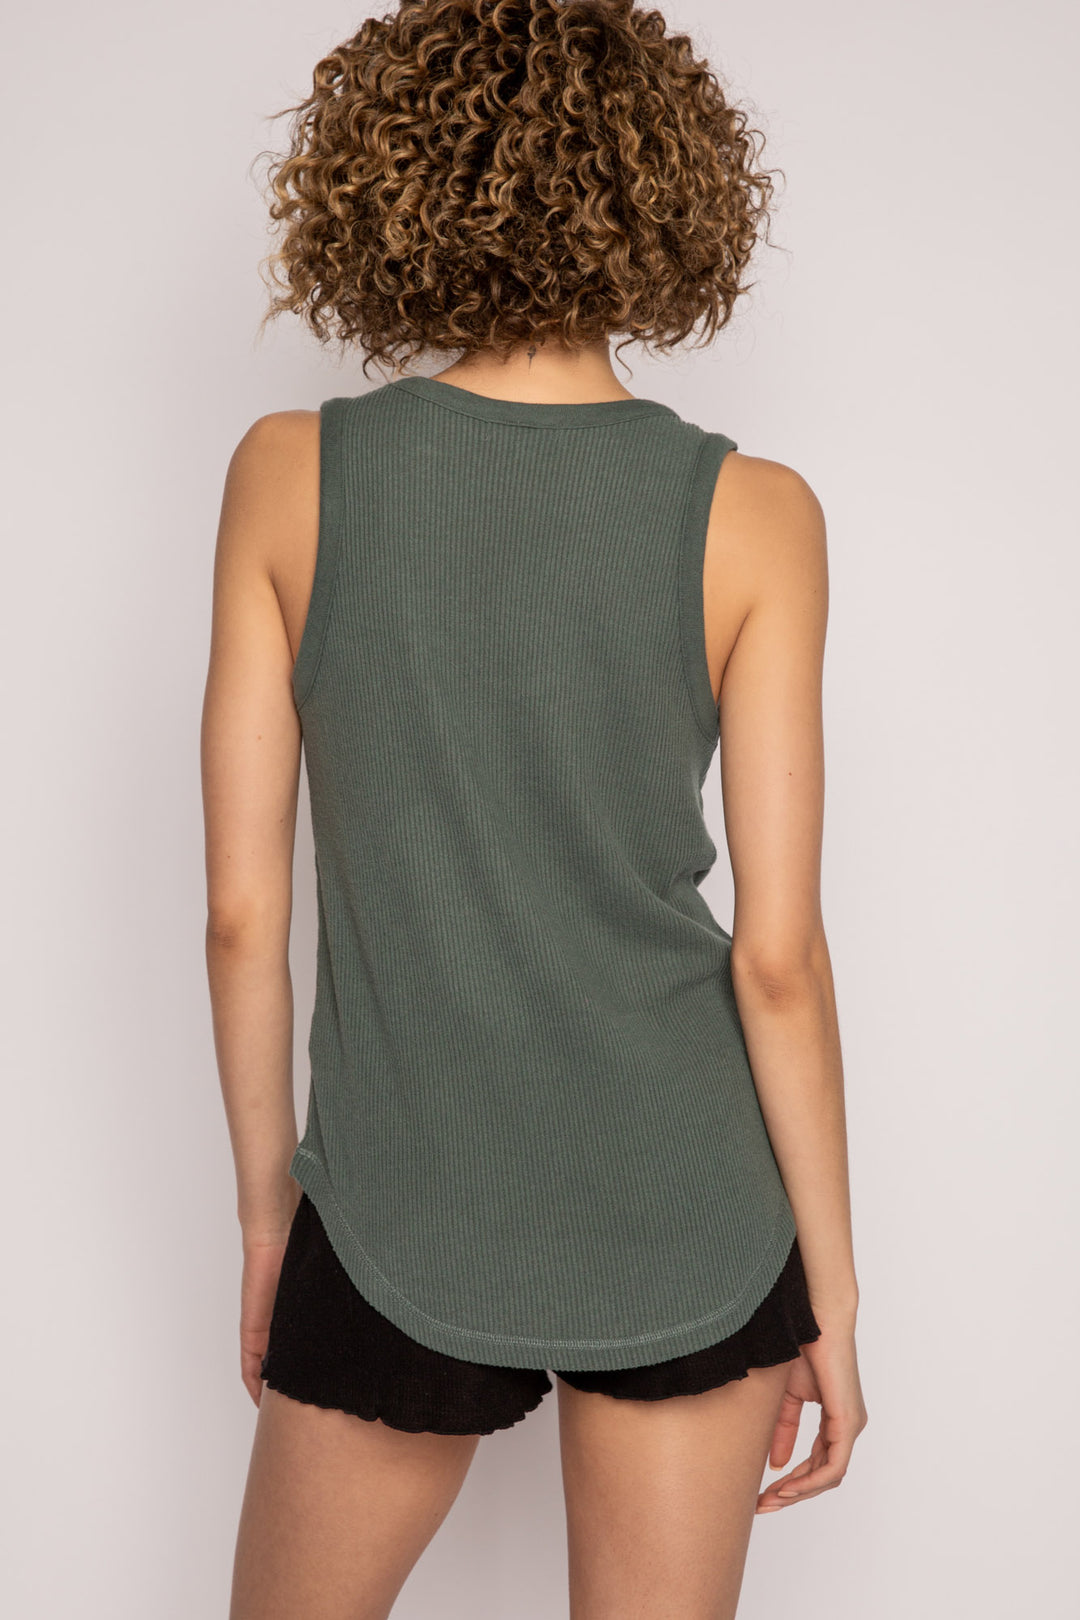 Green tank top in 2x2 brushed rib, with a rounded V-neck. Relaxed fit with rounded hem. (7122613010532)